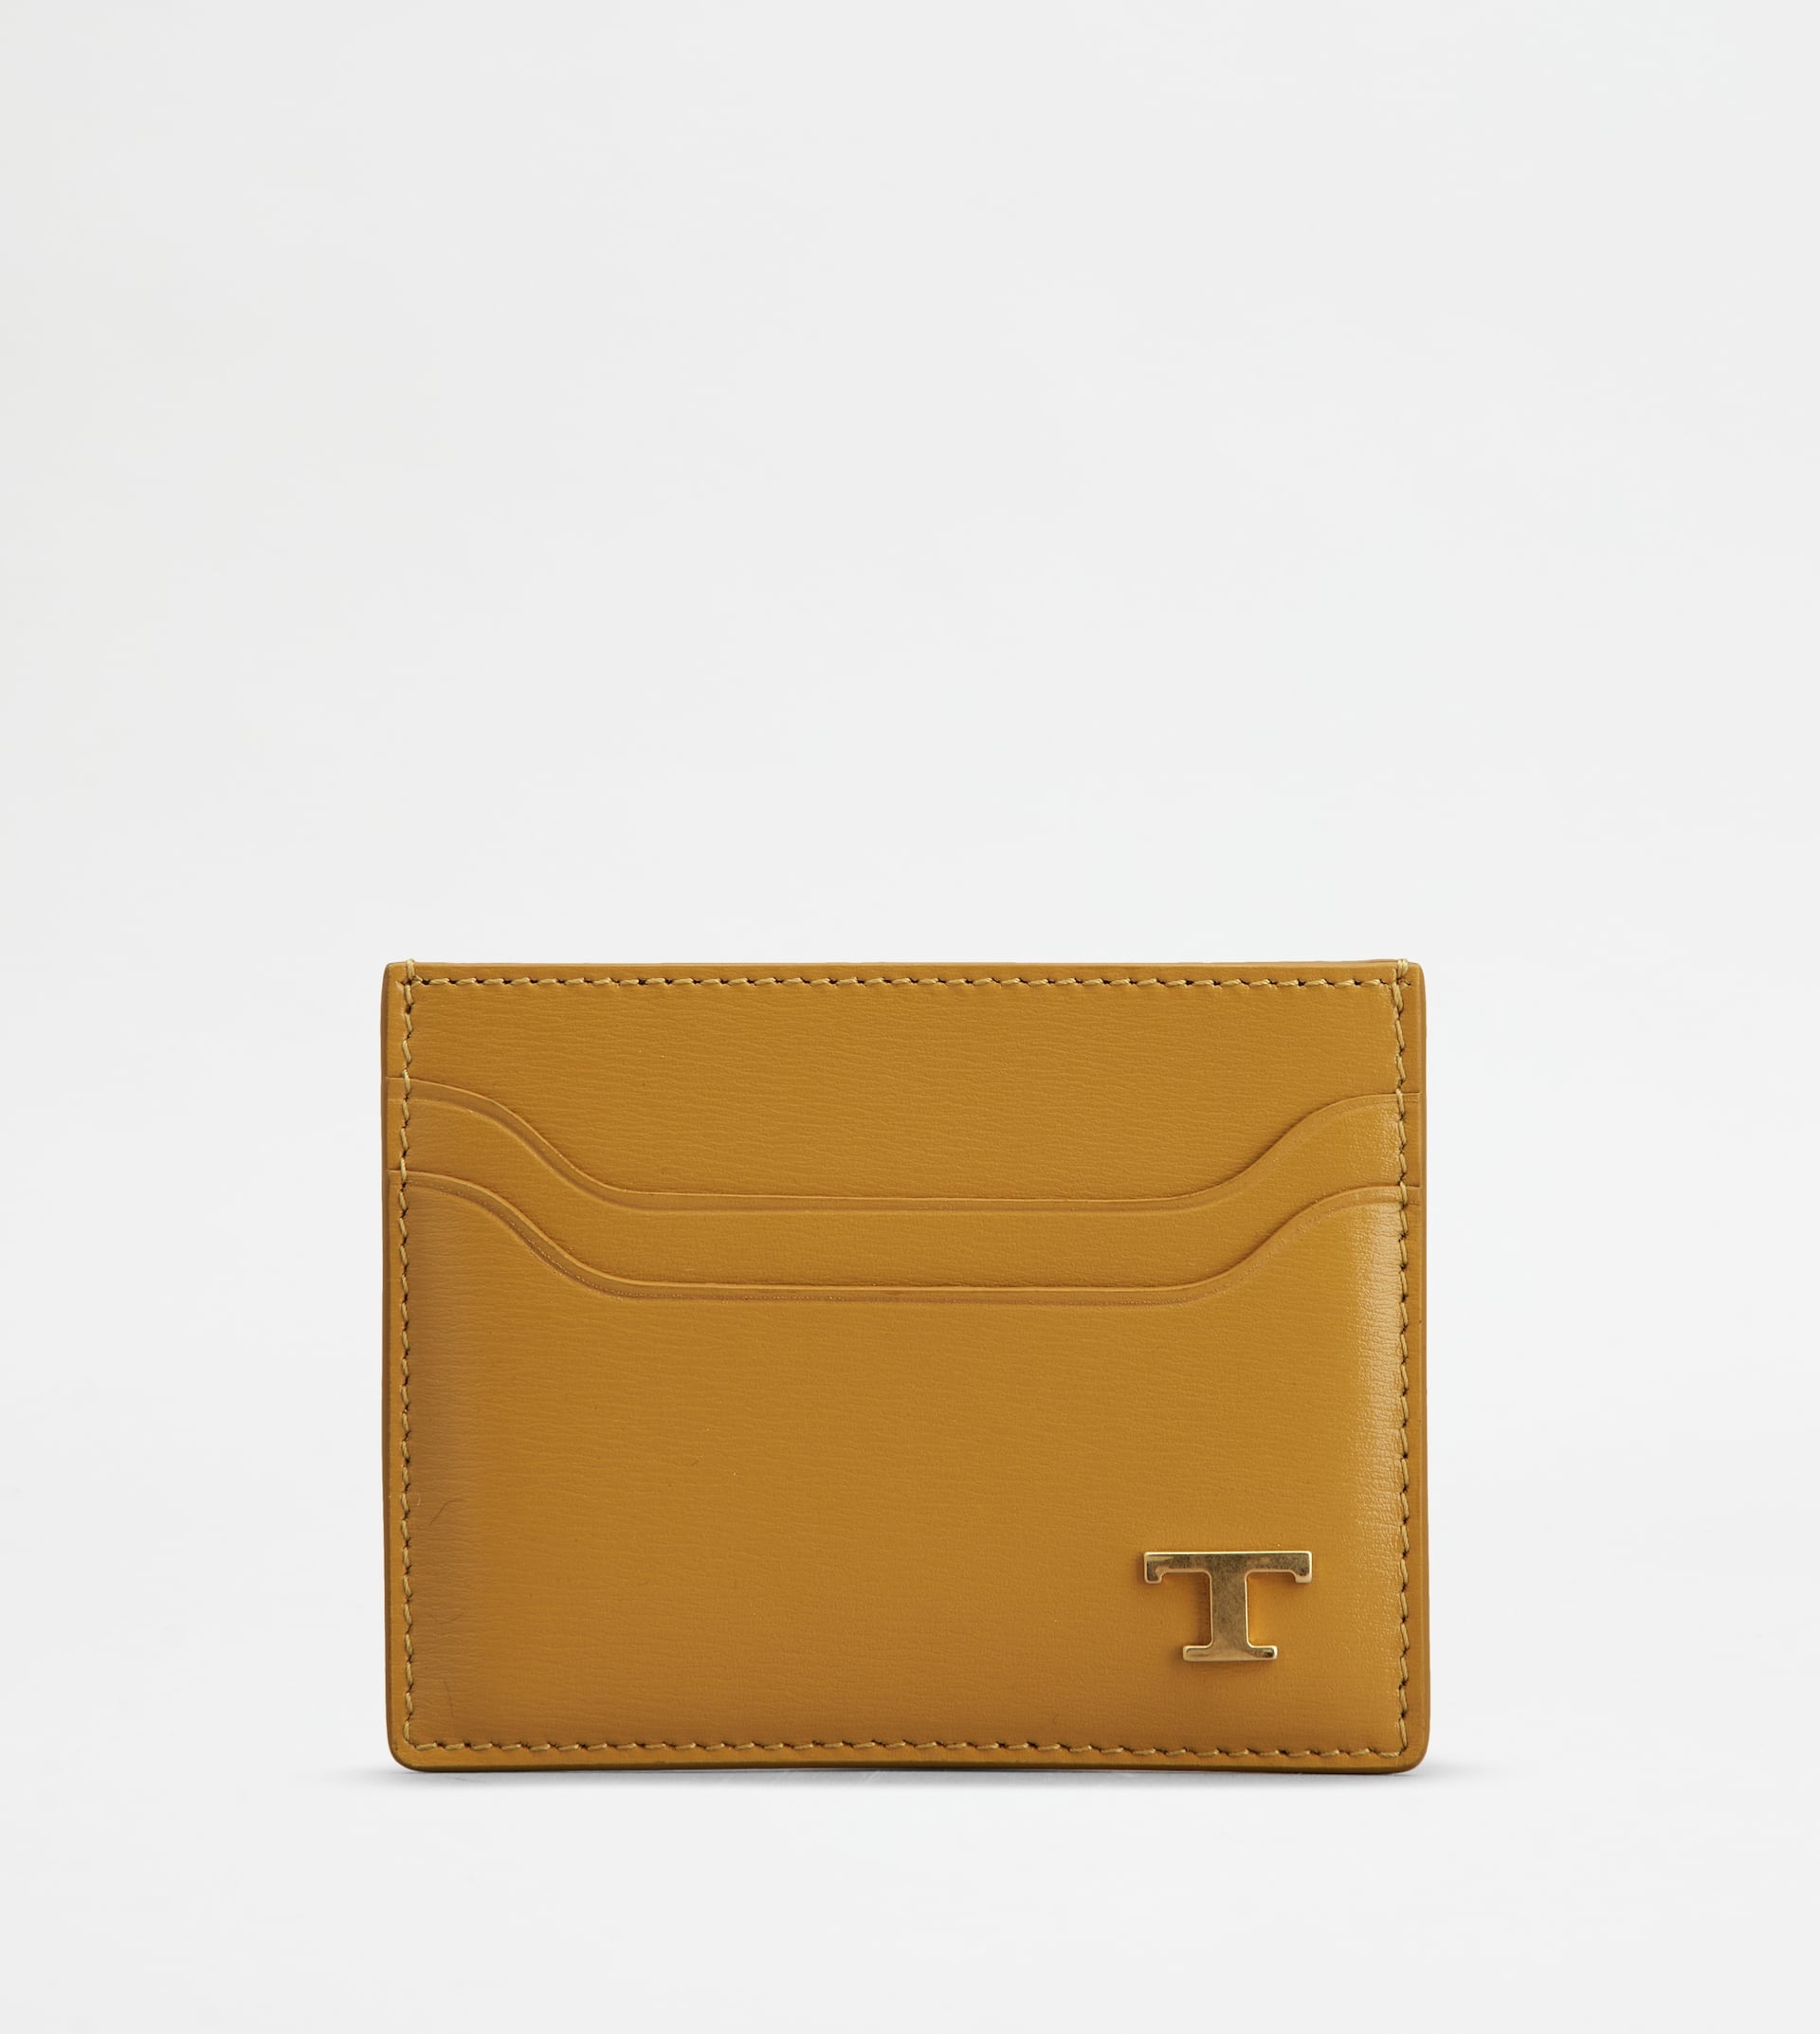 TOD'S CARD HOLDER IN LEATHER - YELLOW - 1